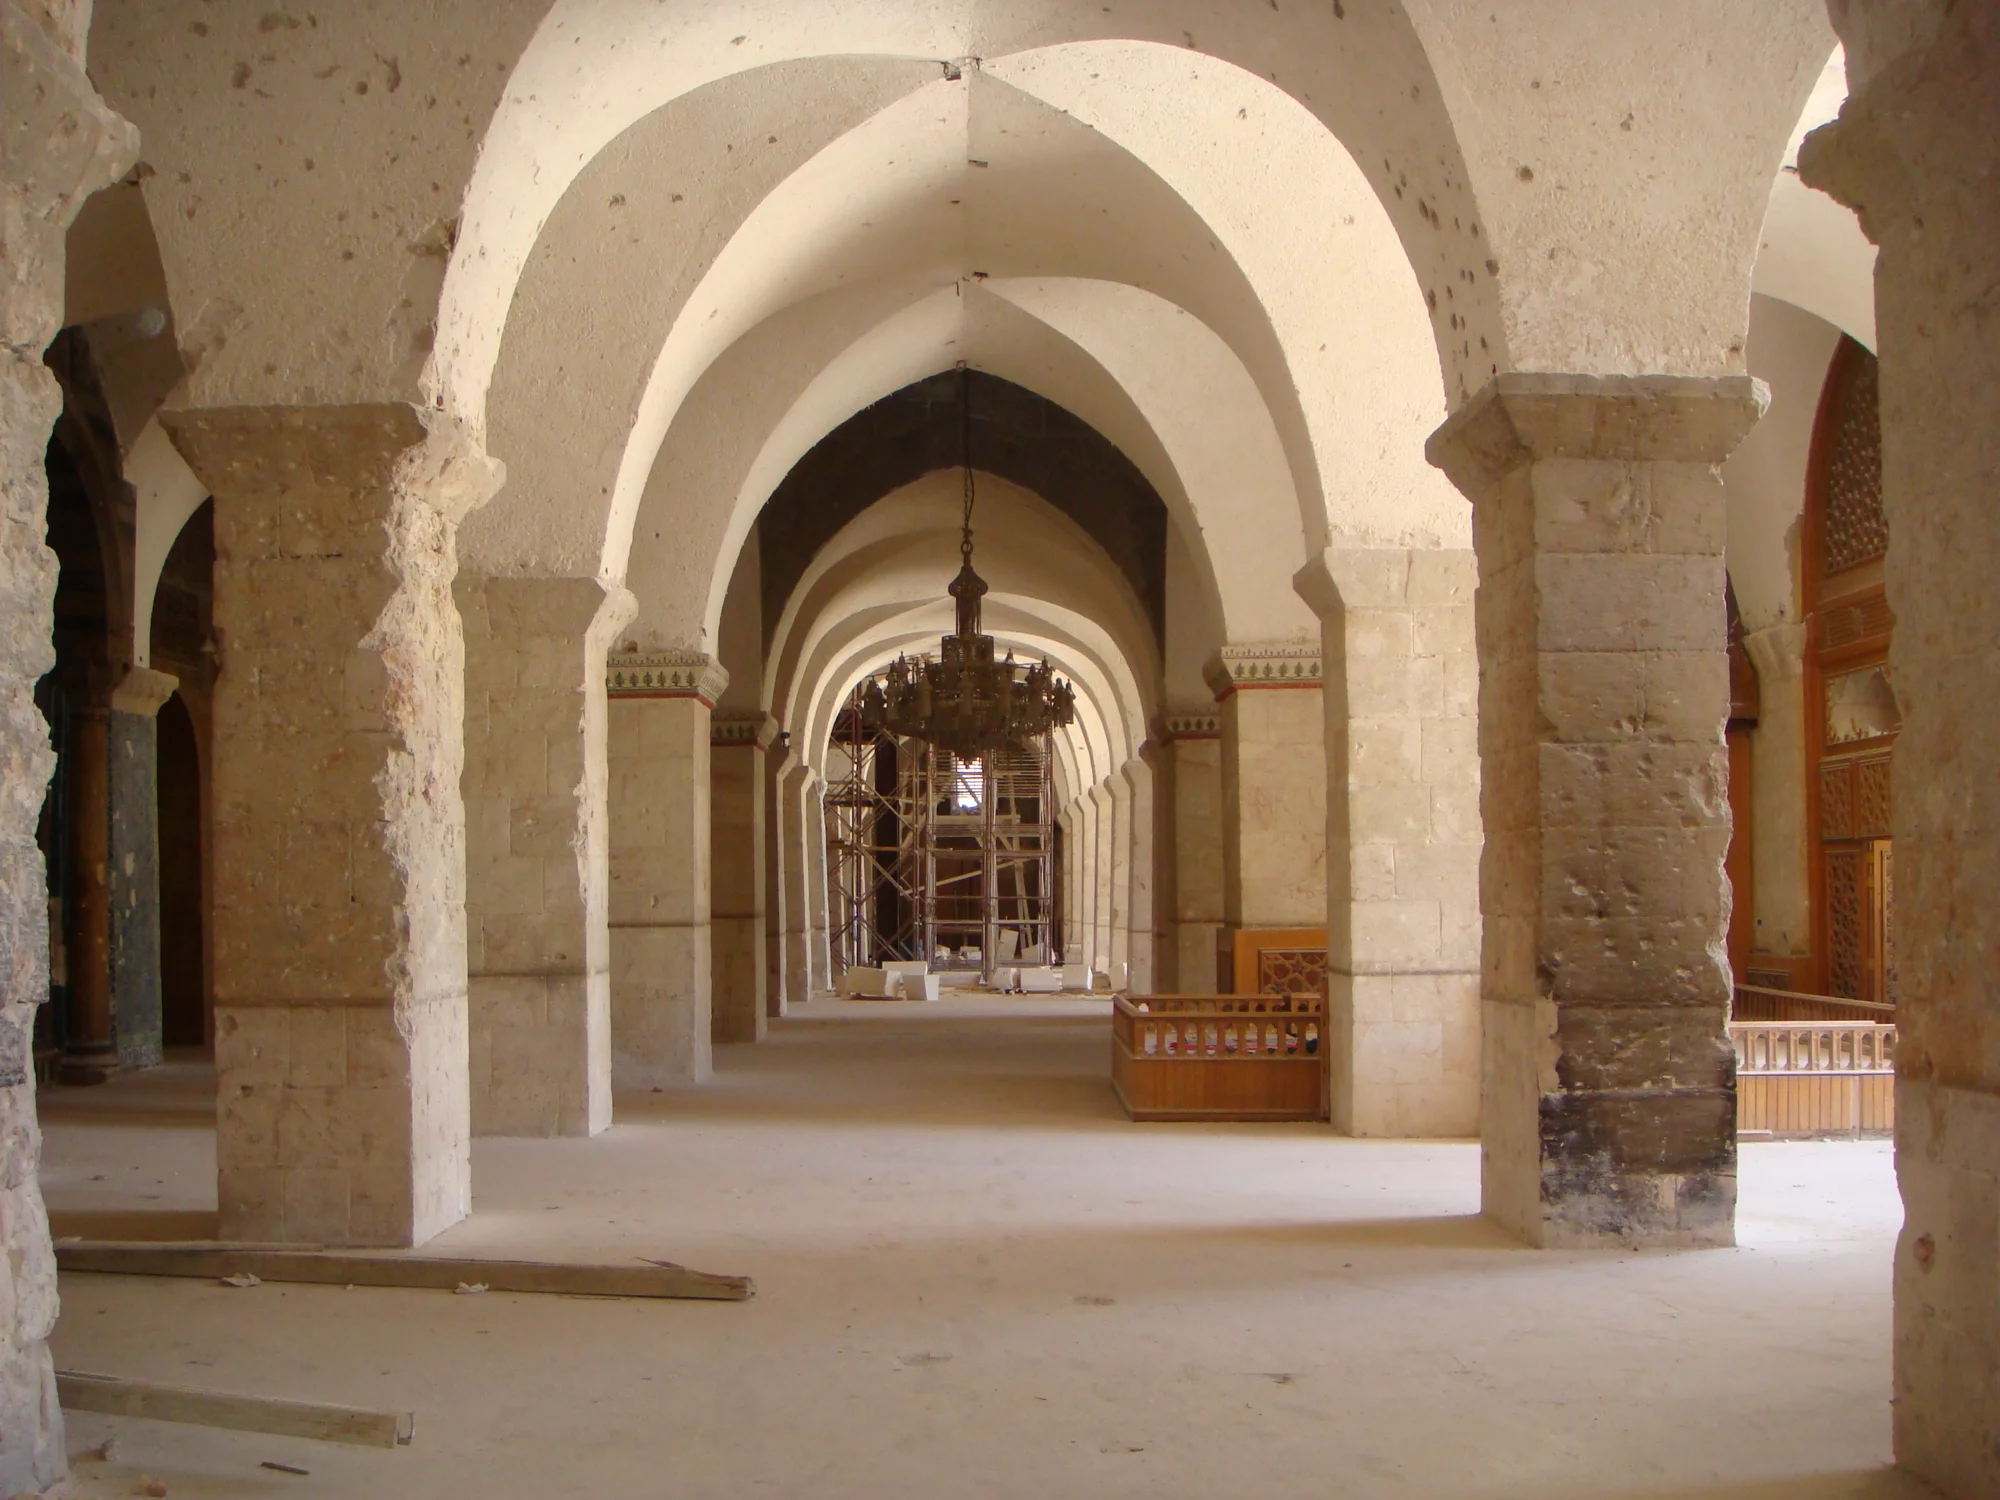 The interior of the war-damaged and cleared prayer hall of the Great Umayyad Mosque of Aleppo under restoration – view to the west